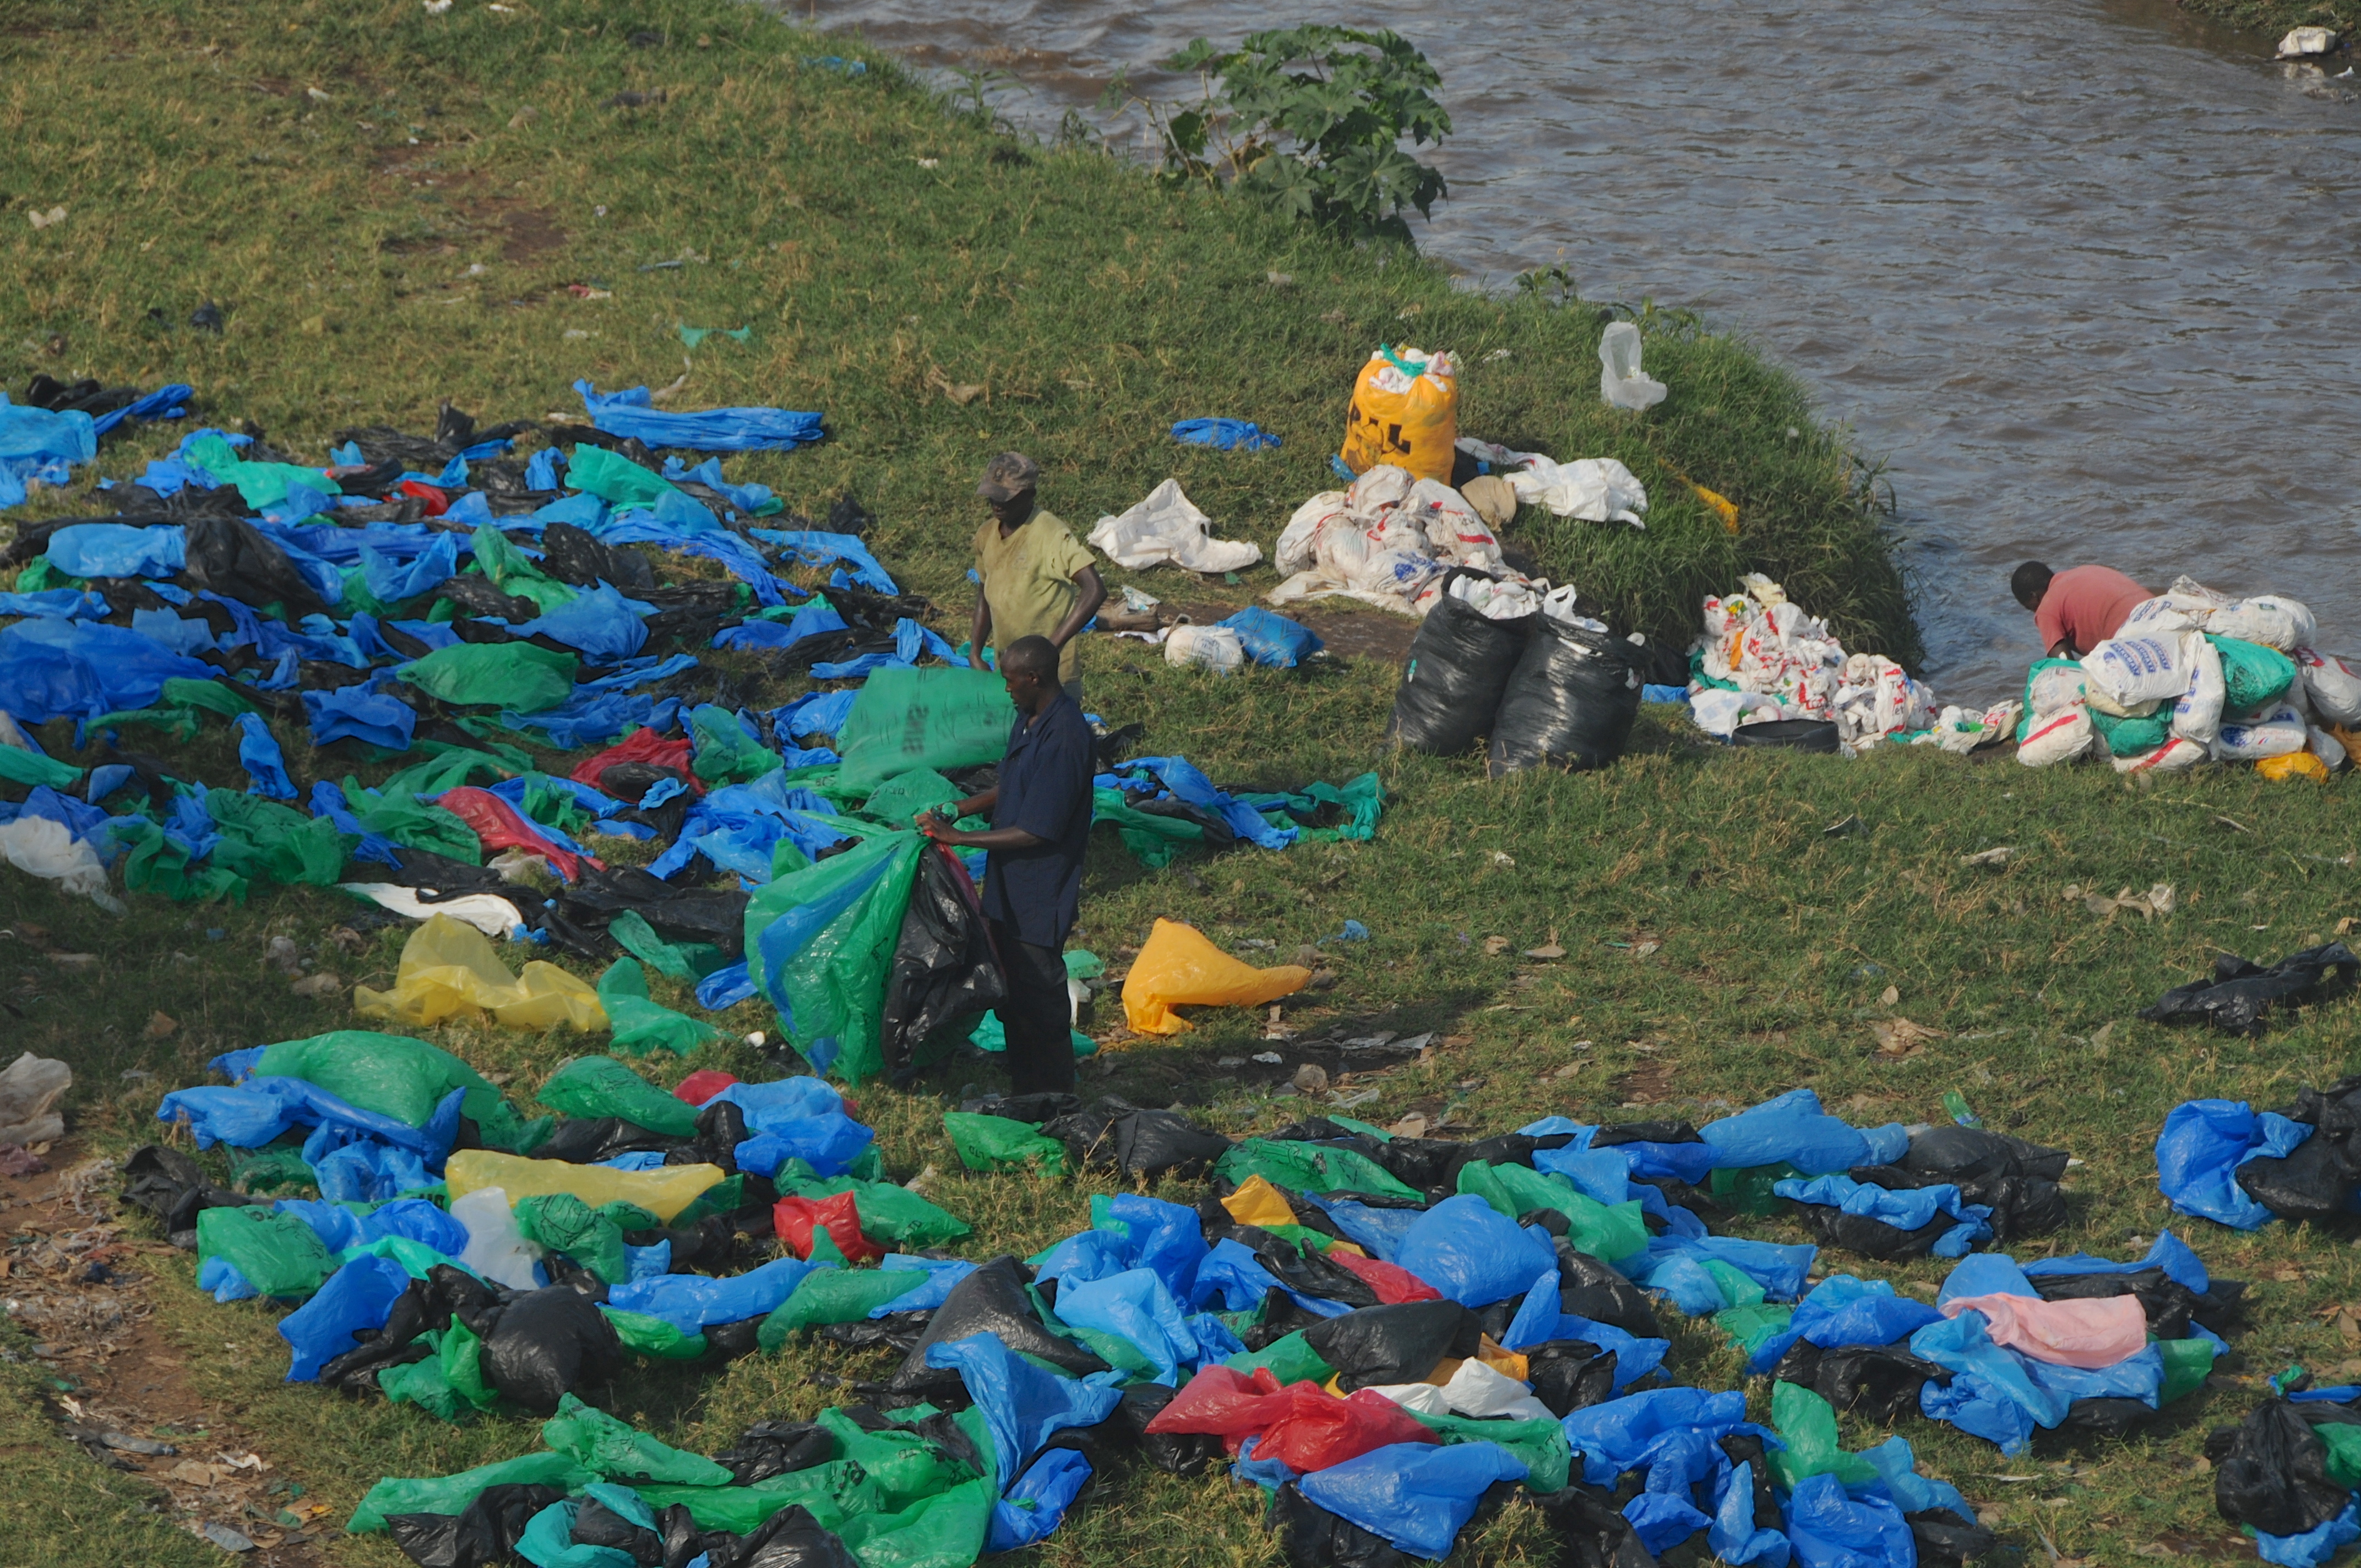 Kenyans collecting used plastic bags from Nairobi River to resell in marketplaces